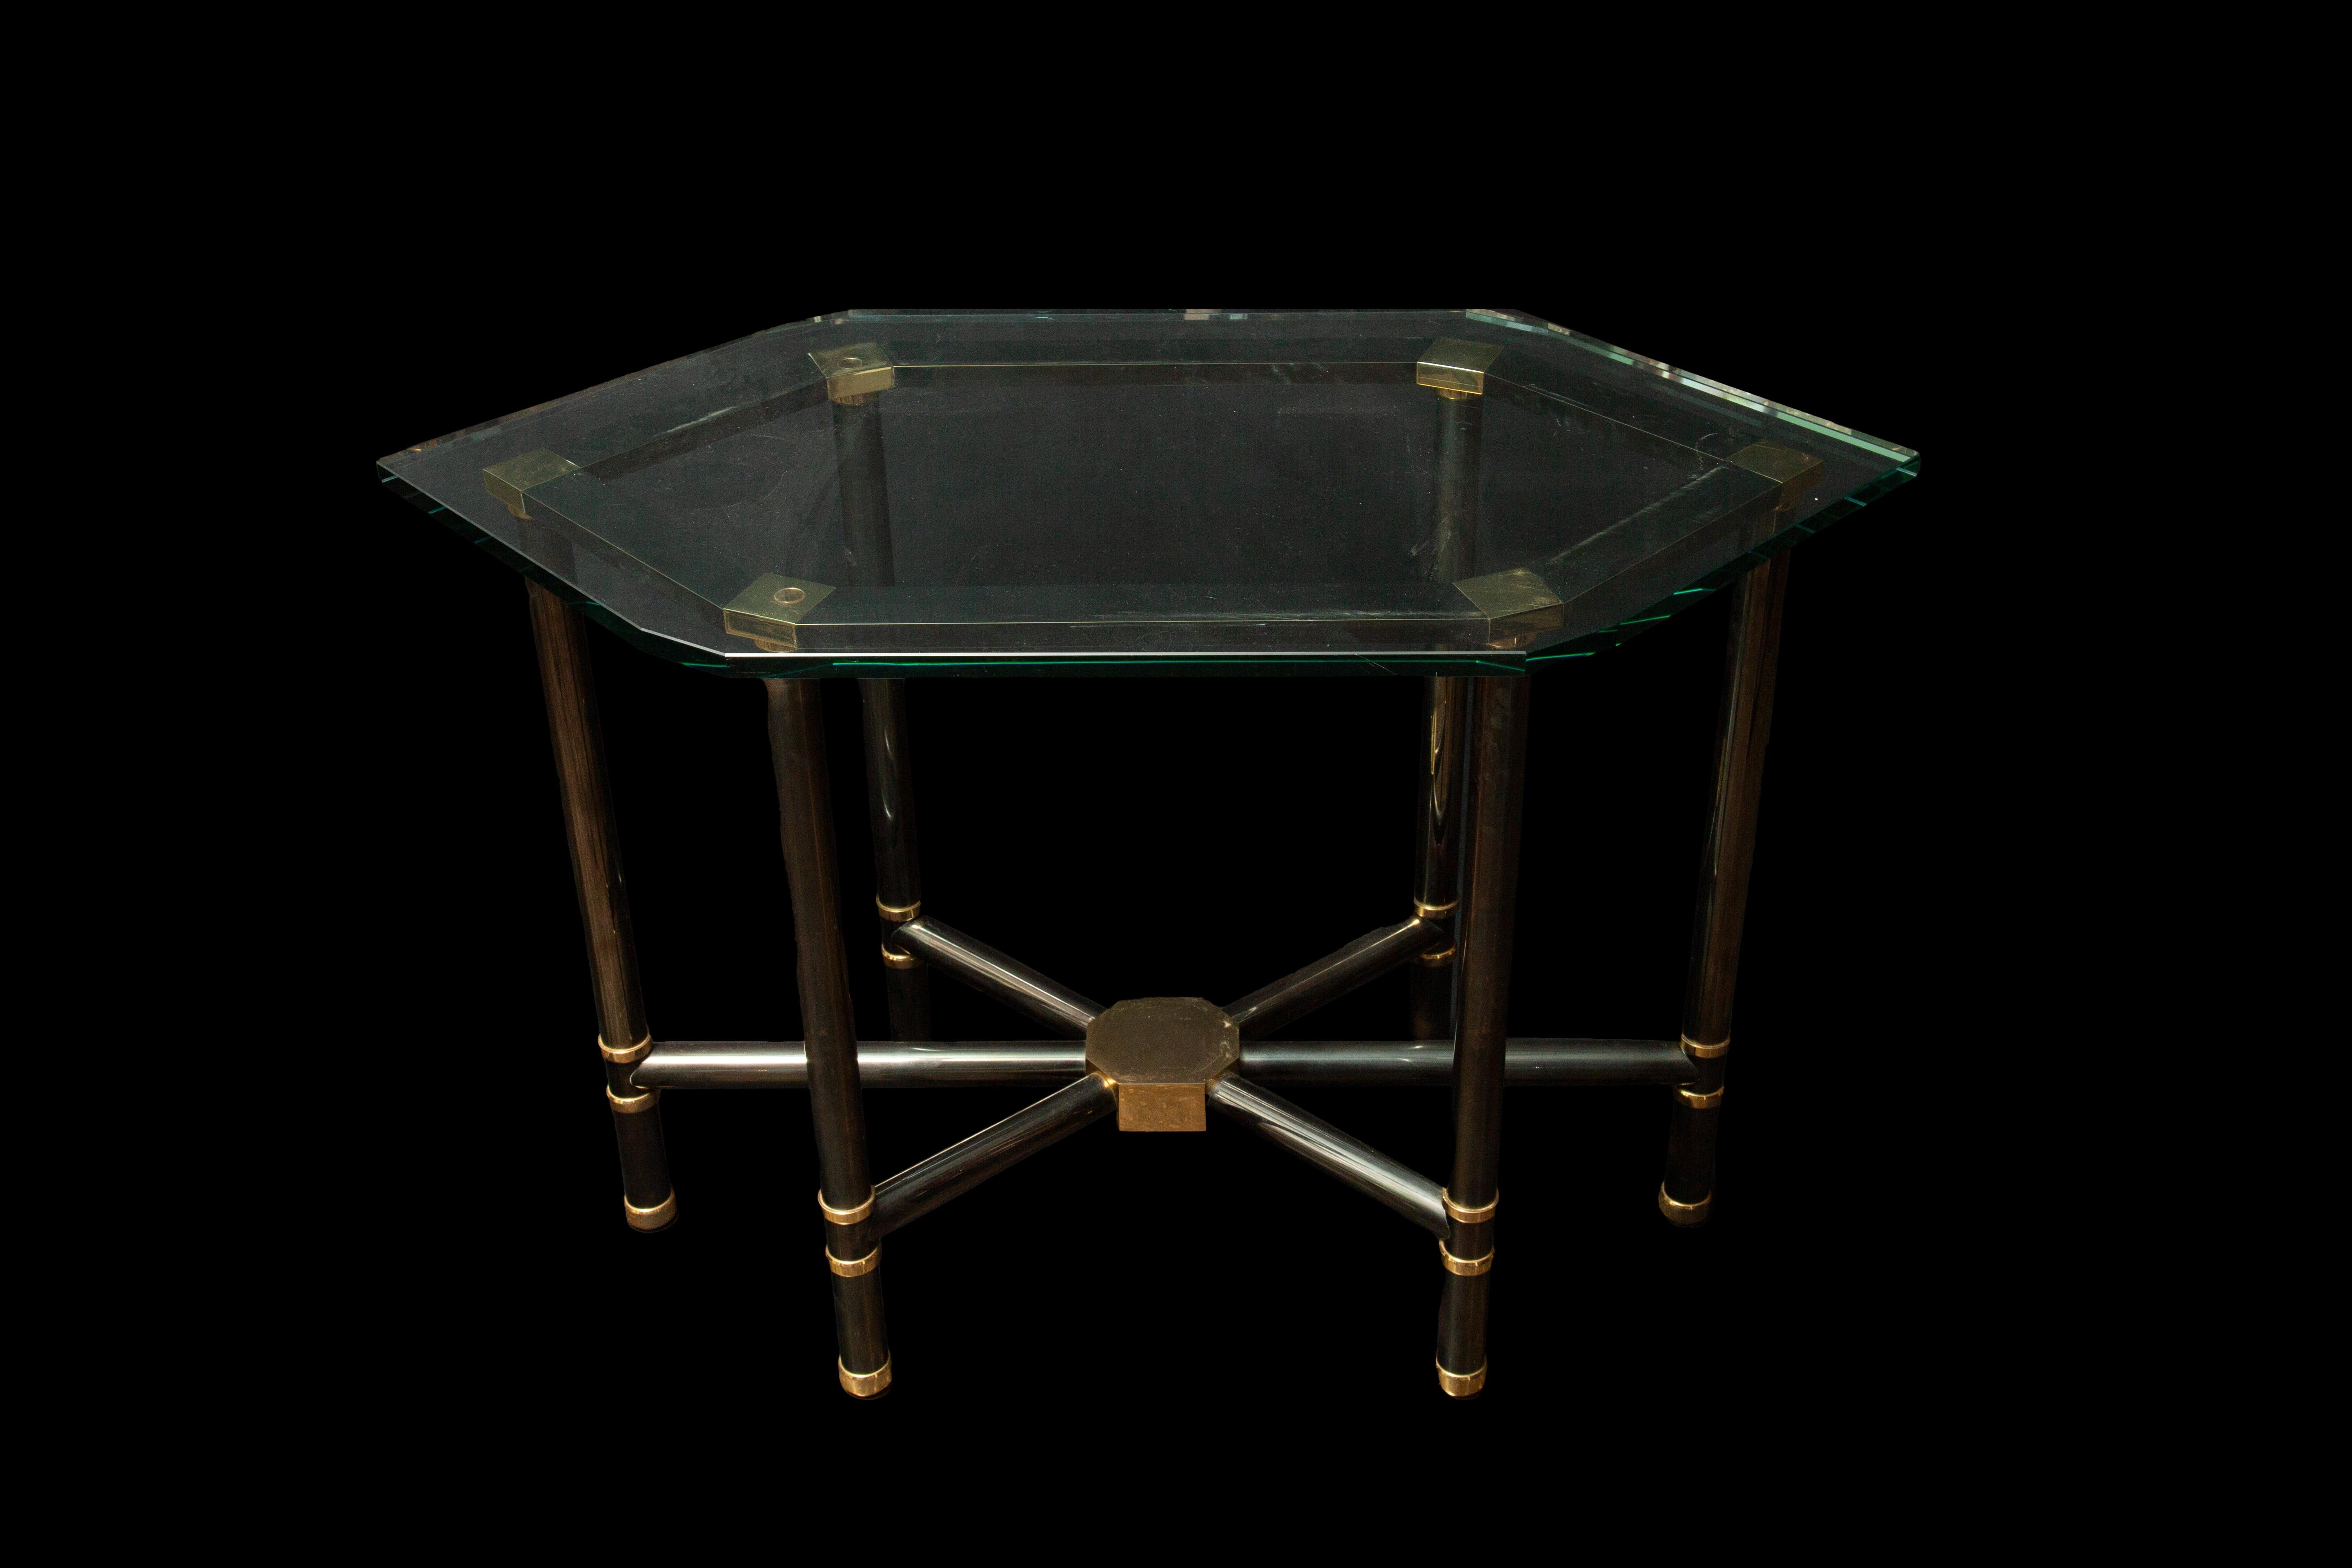  Exceptional and rare table, exquisitely crafted in the distinguished style reminiscent of Maison Jansen's 